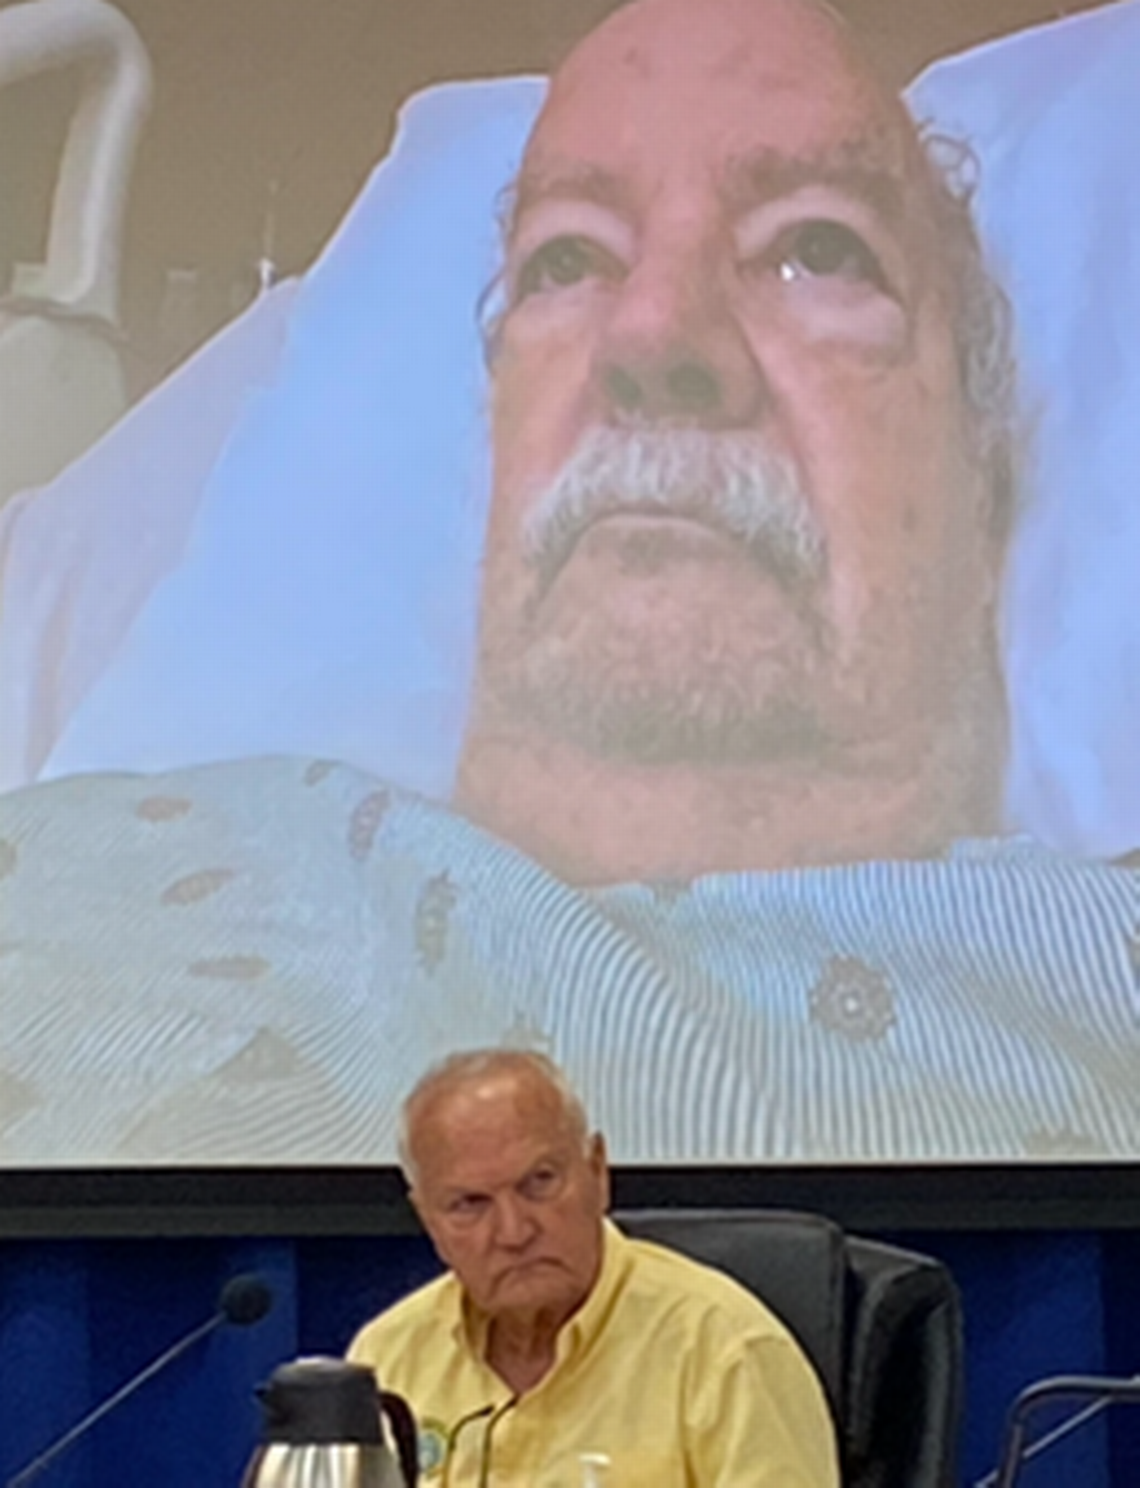 Islamorada Mayor Pete Bacheler appears on screen from his hospital bed during a Village Council meeting Thursday, Aug. 25, 2022. Sitting at the dais underneath the screen is Village Counciman Buddy Pinder. Details leading up to a vote taken during that meeting are under Monroe County State Attorney’s Office investigation.